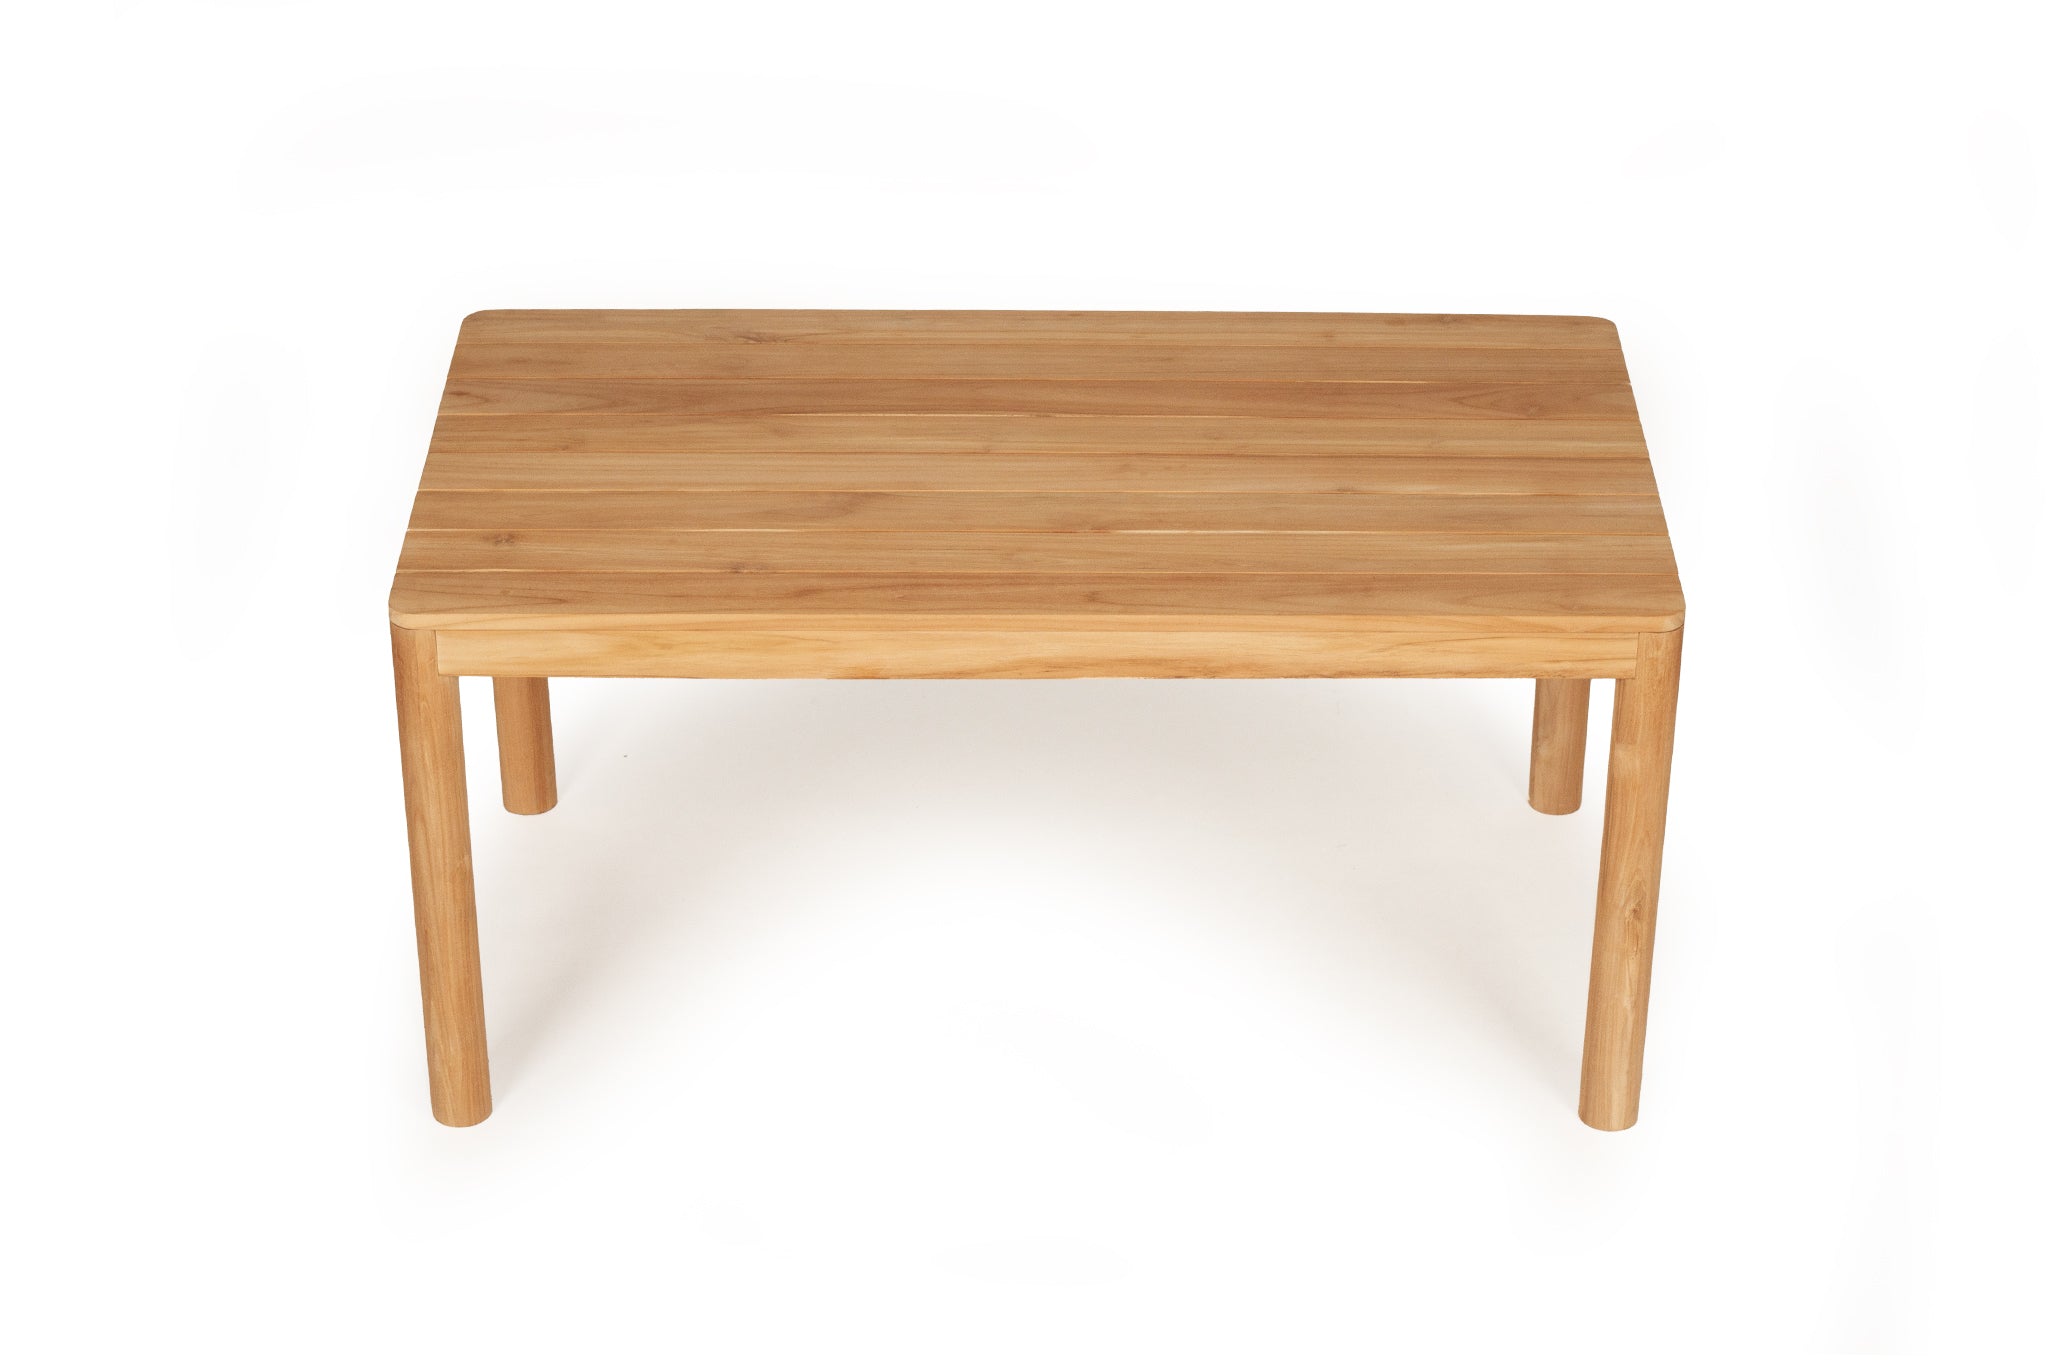 Lithgow Teak Outdoor Dining Table